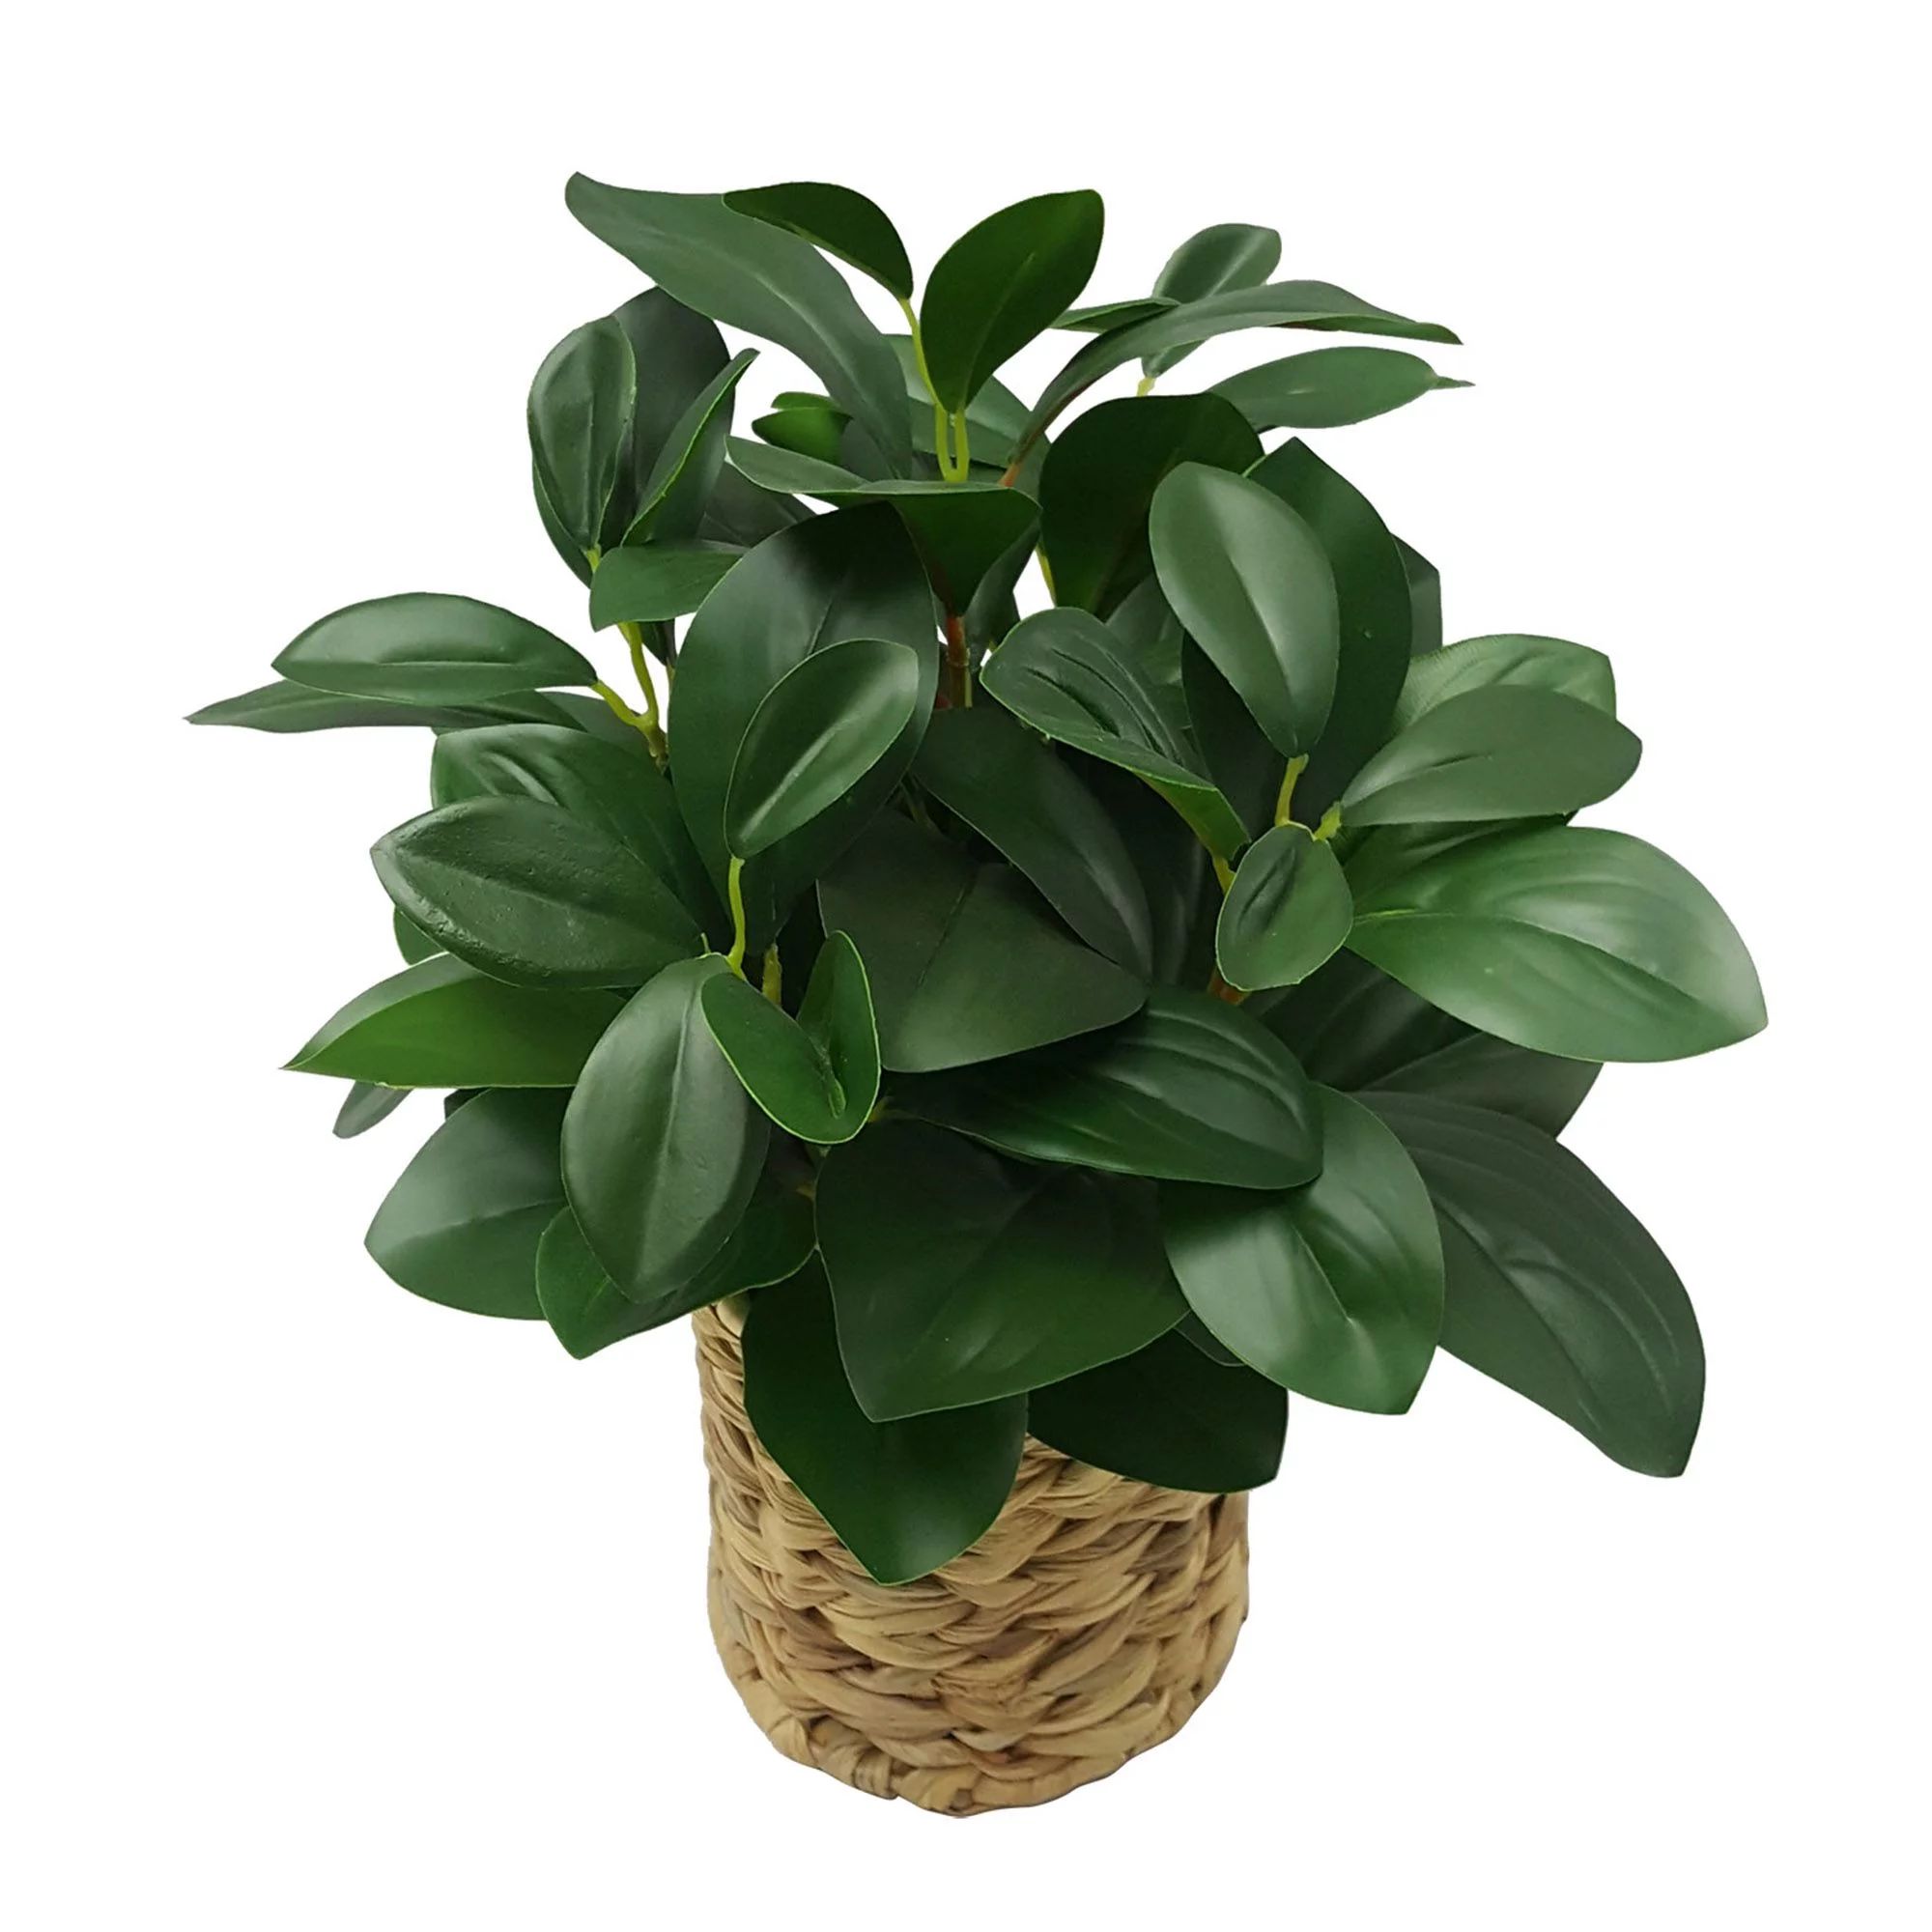 Better Homes and Gardens Artificial 13" Peperomia Plant in Water Hyacinth Basket | Walmart (US)